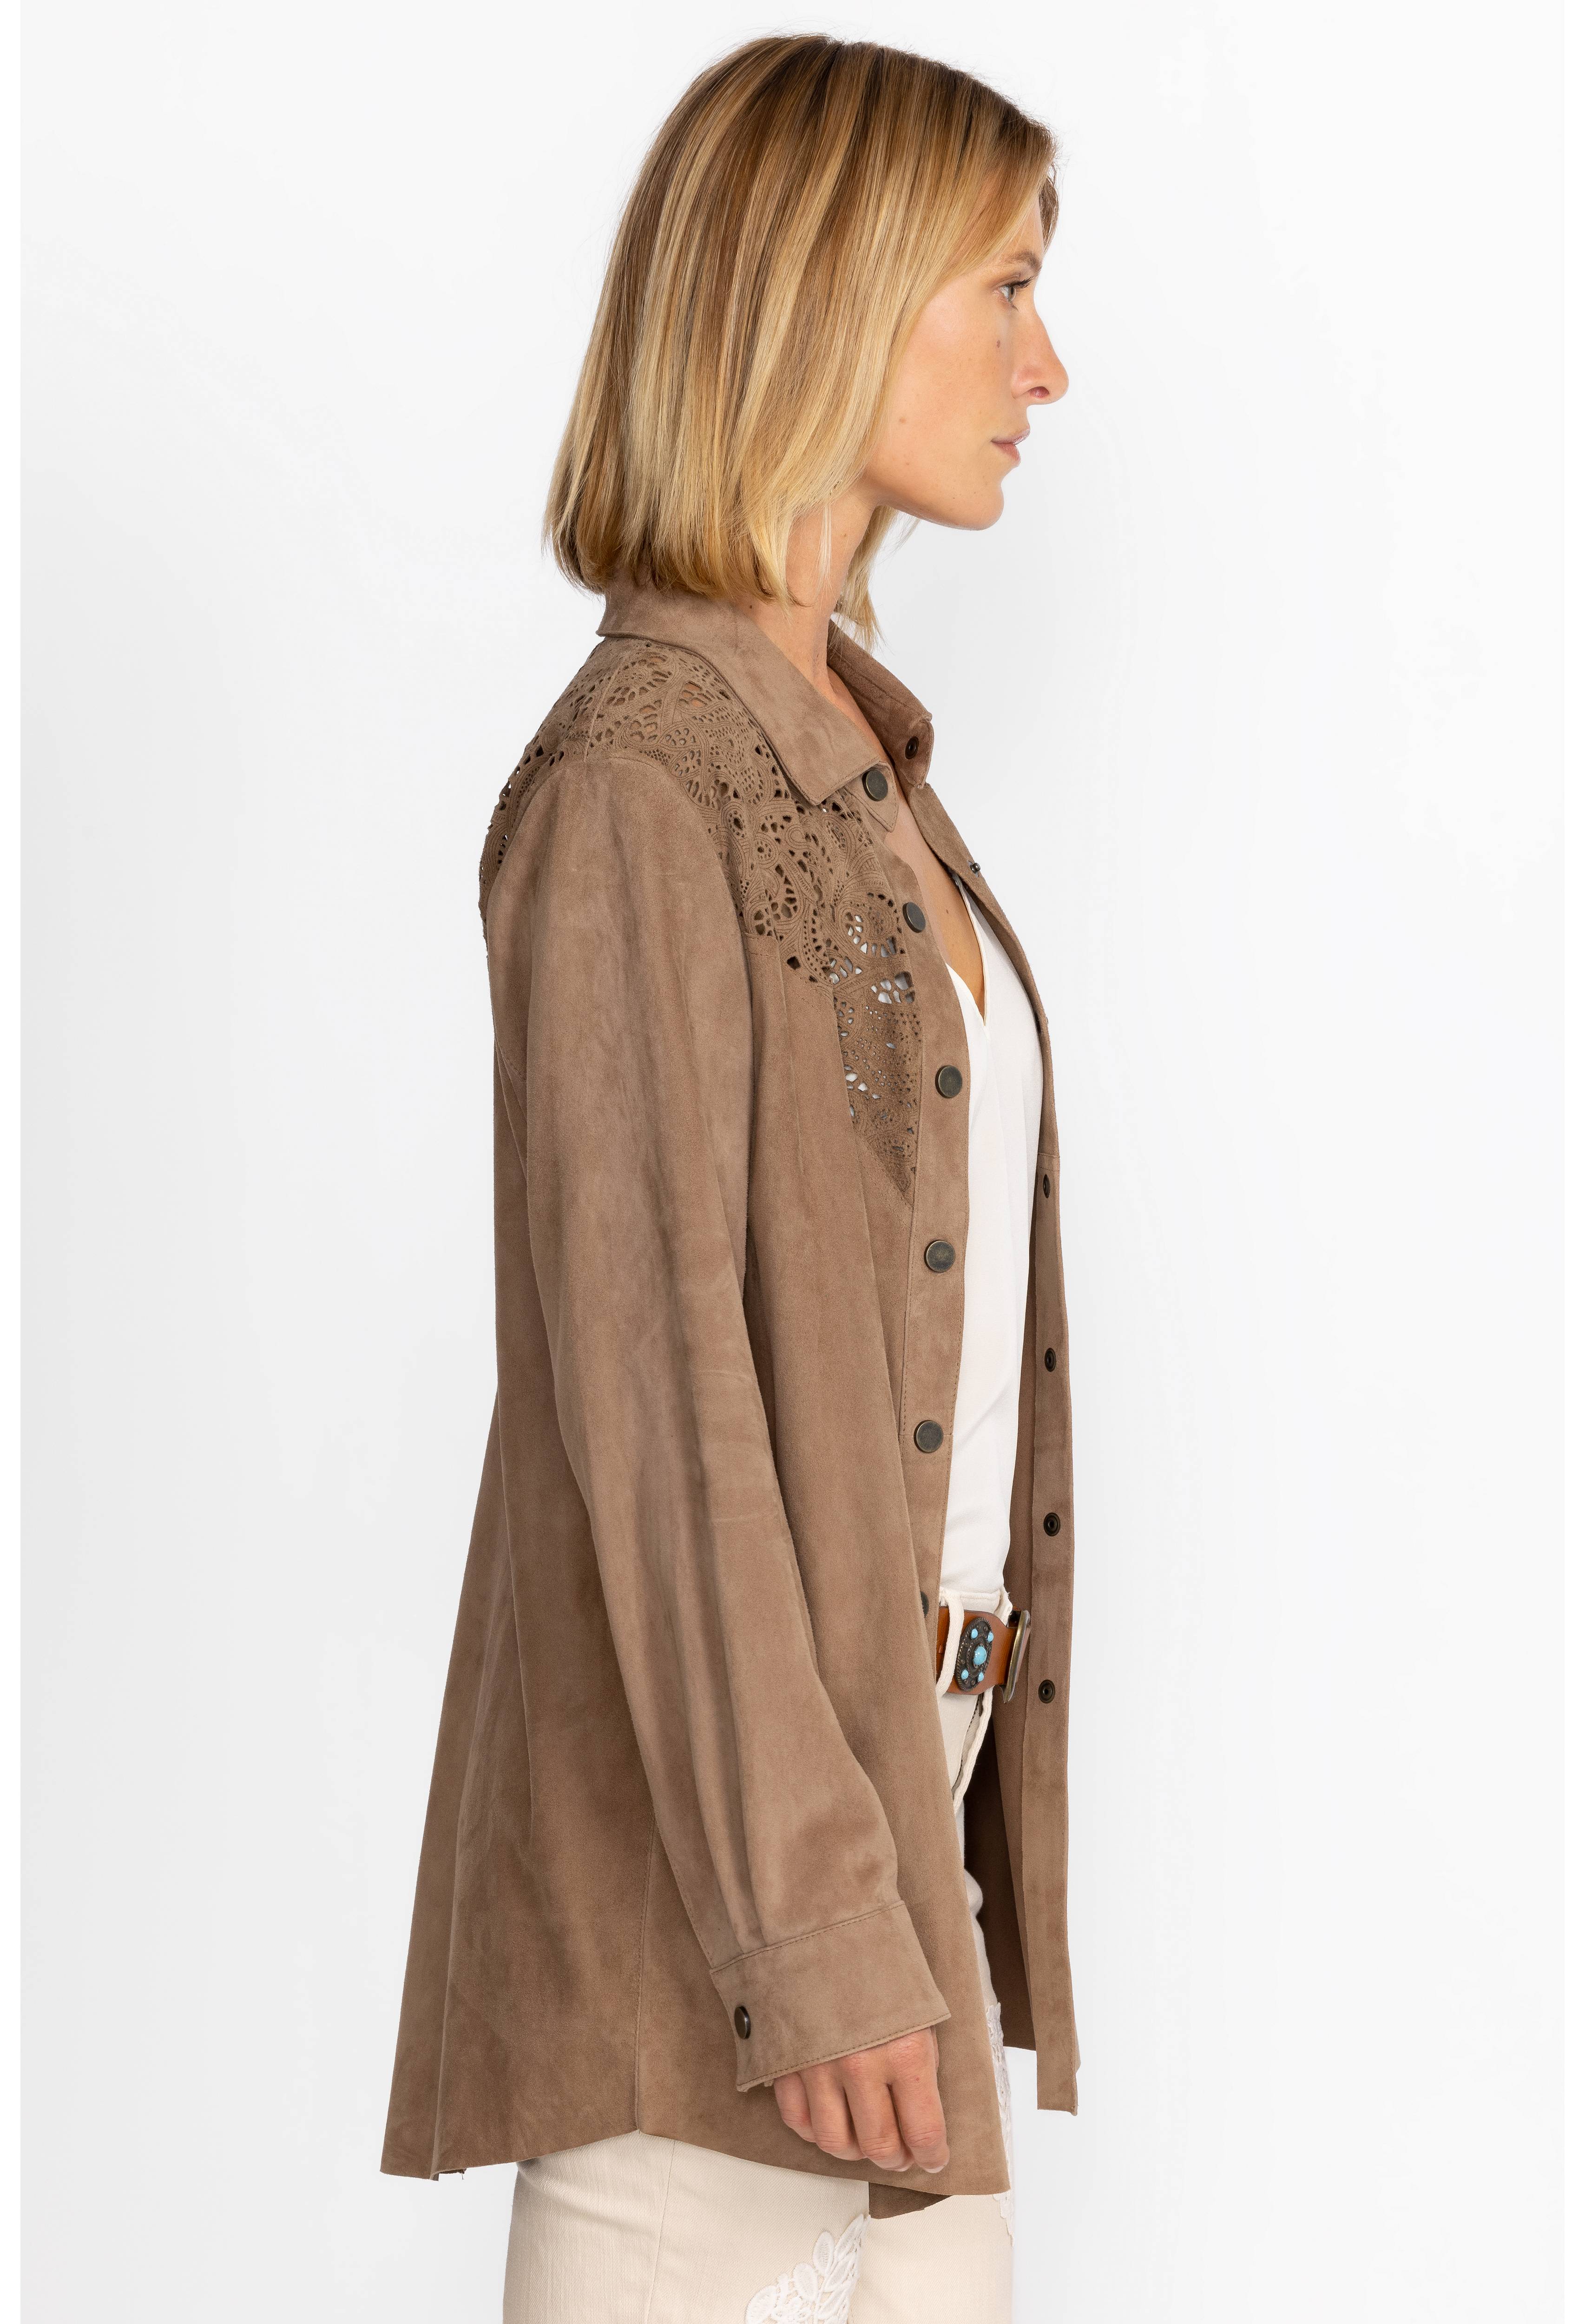 Fiore Suede Western Shacket, , large image number 2